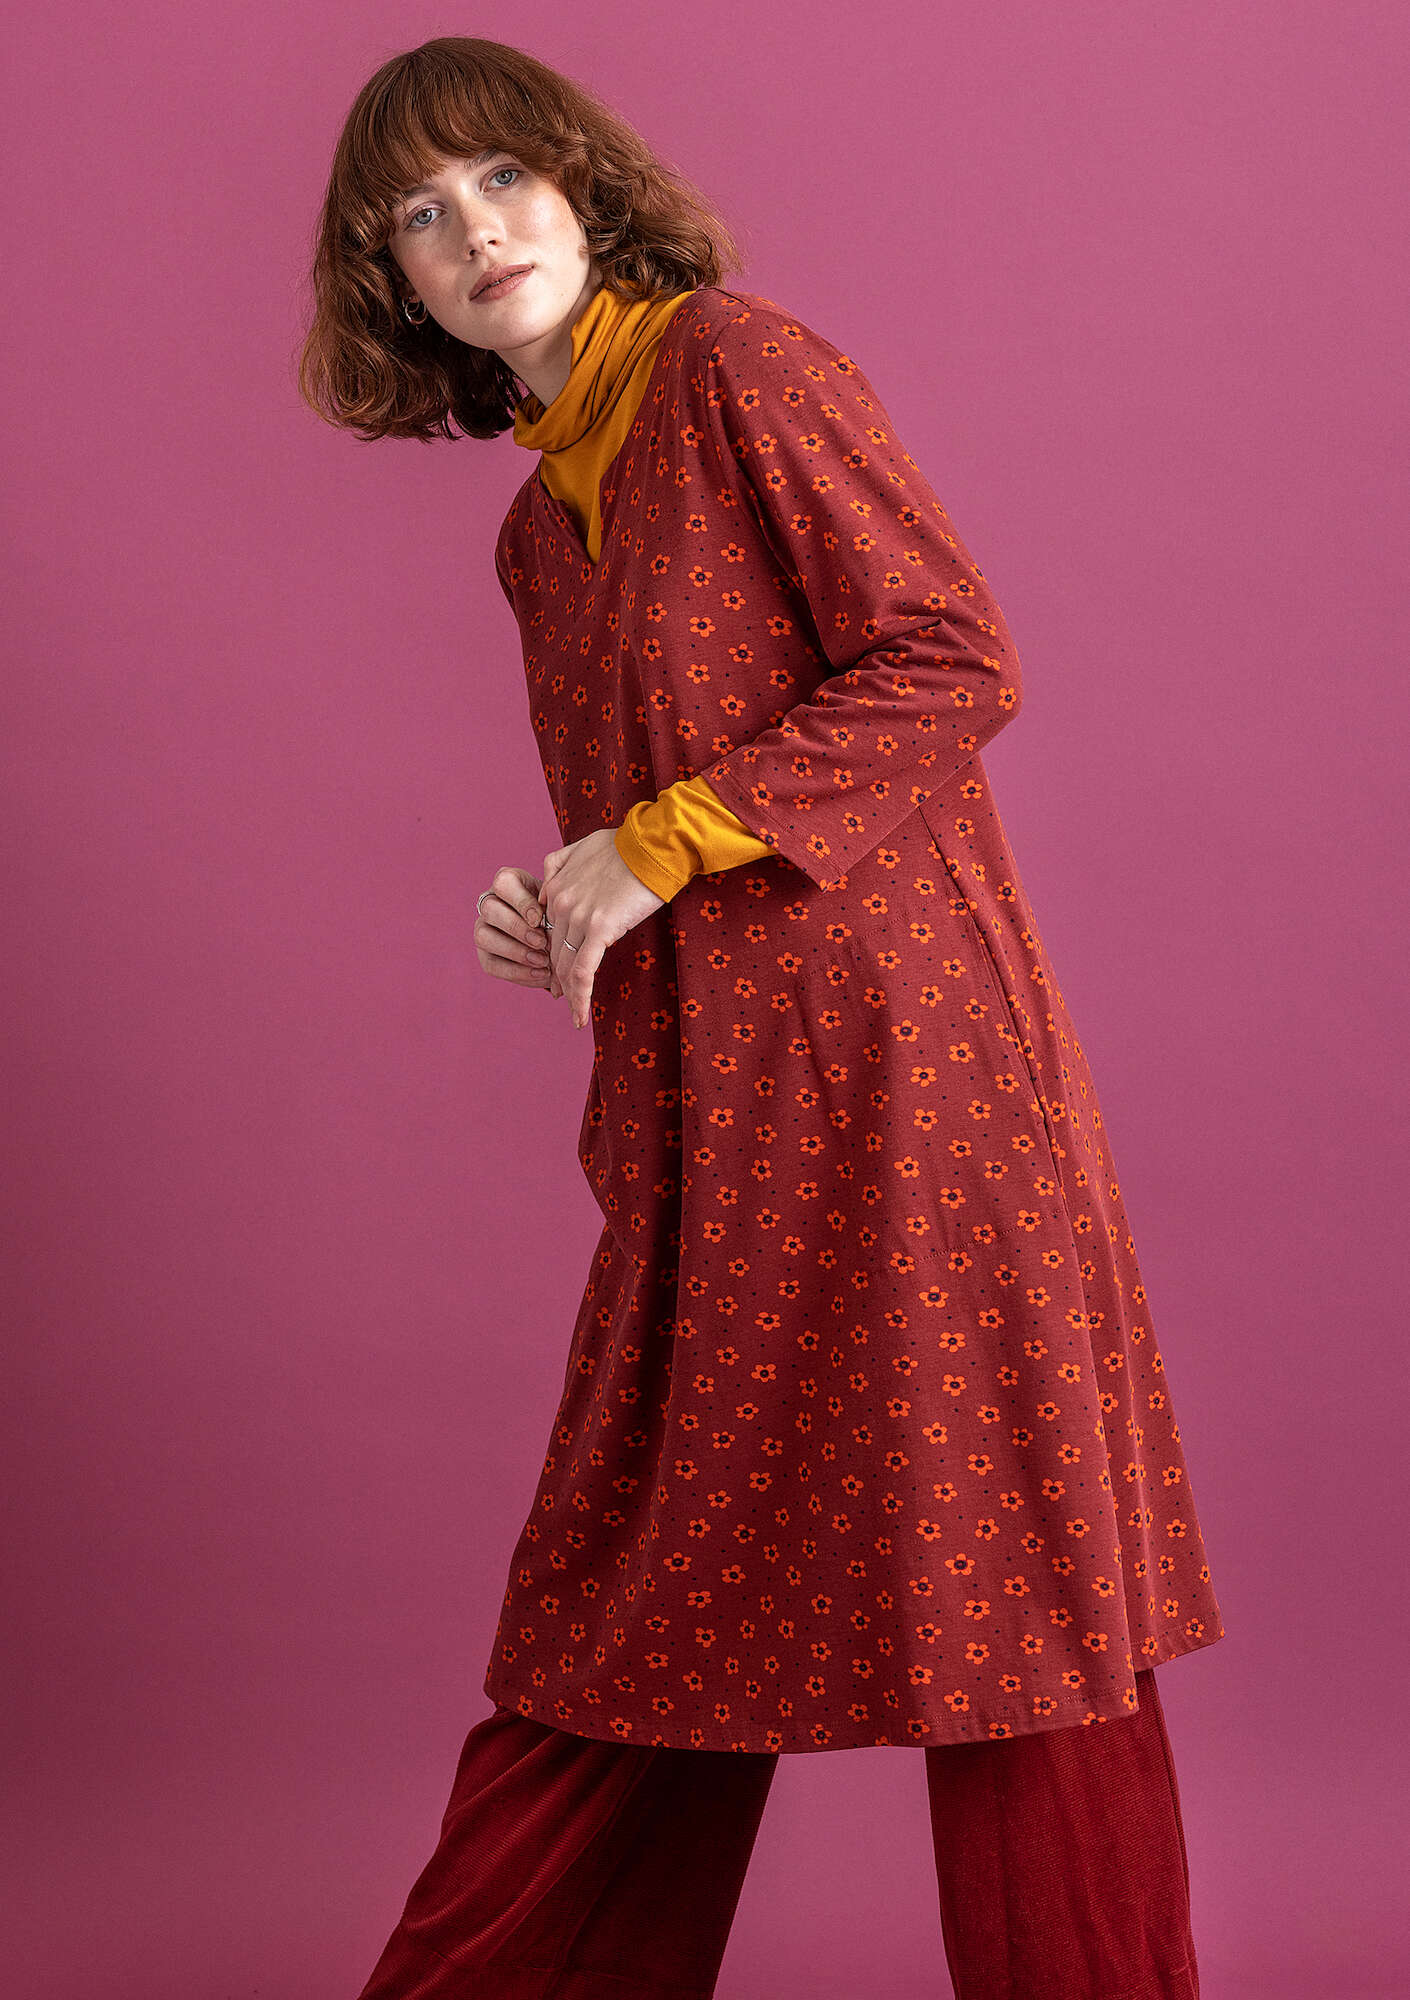 “Belle” jersey dress in organic cotton/spandex agate red/patterned thumbnail